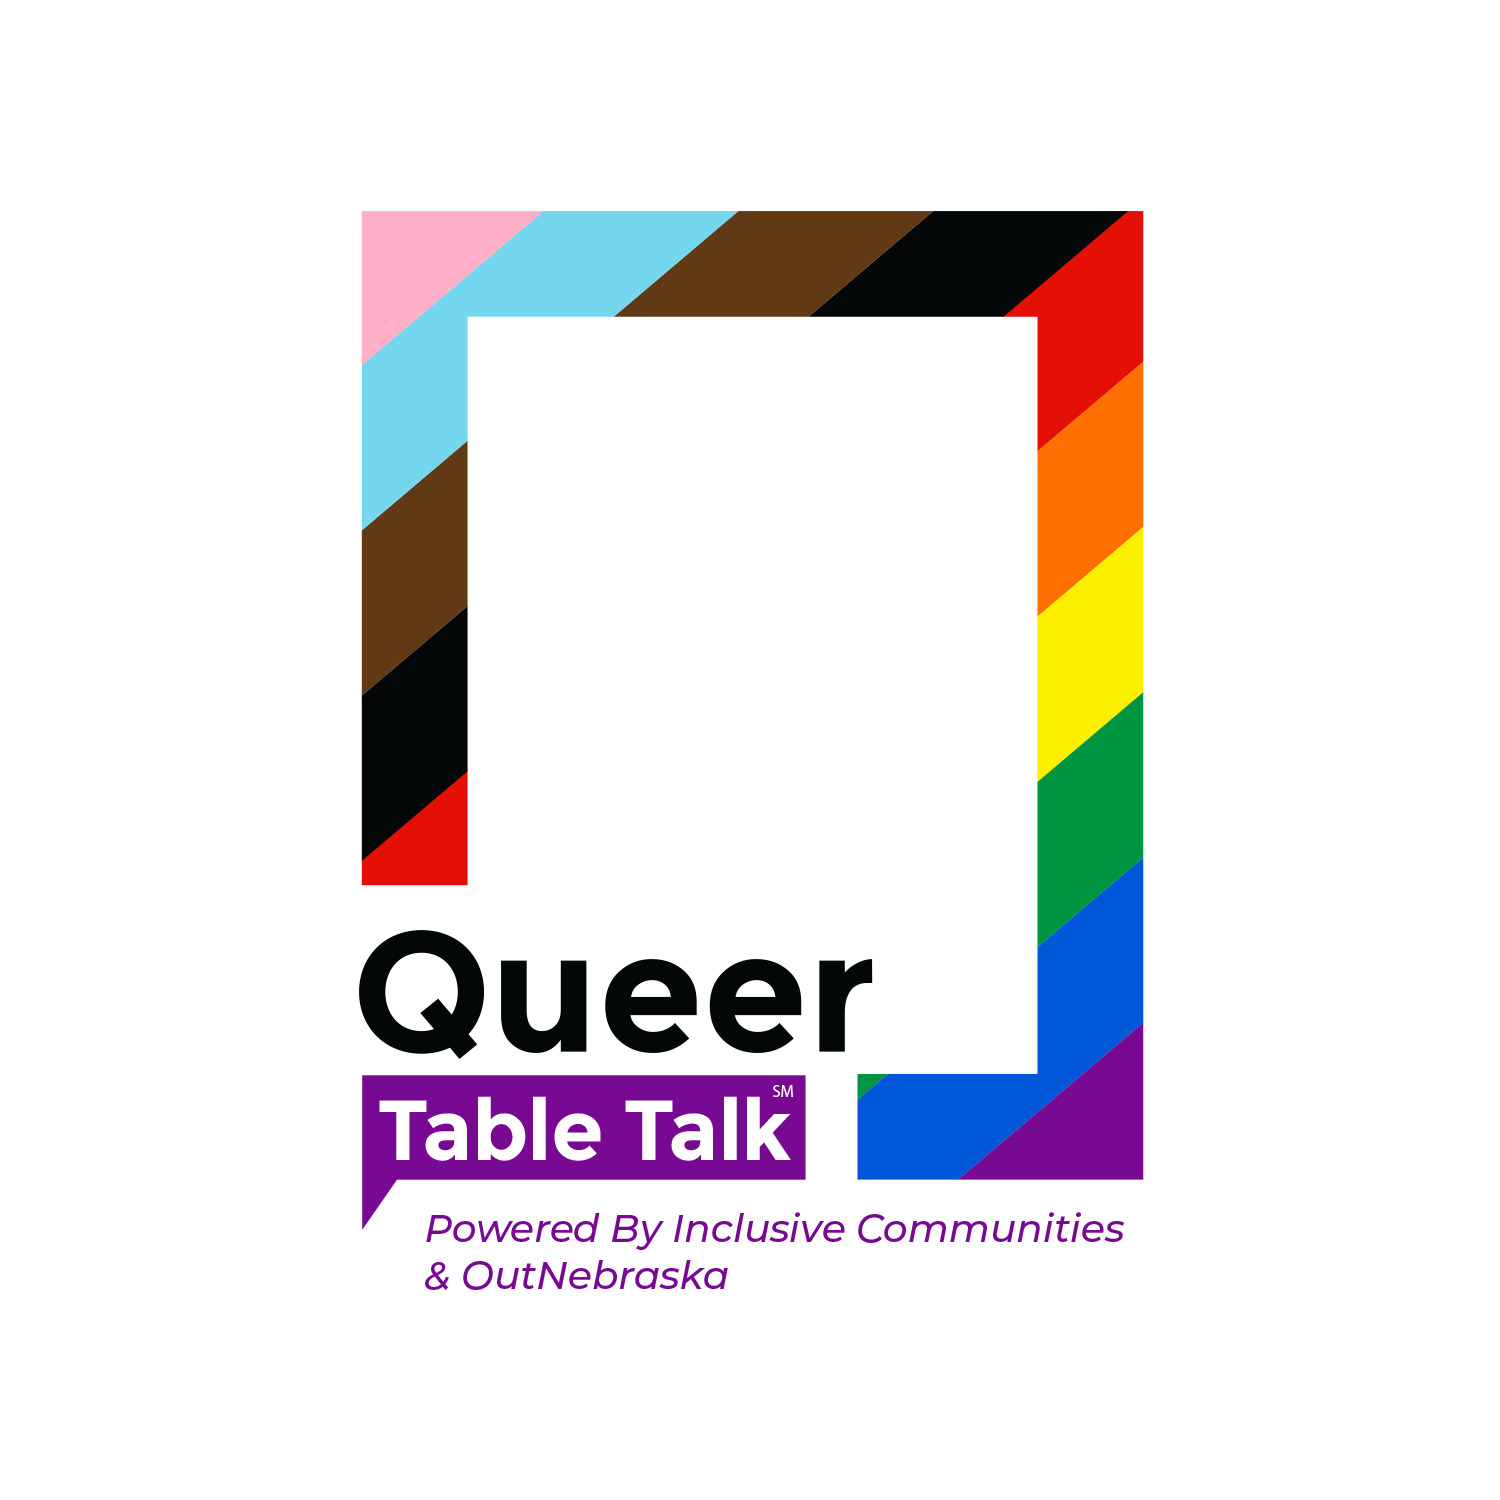 Queer Table Talk powered by Inclusive Communities and OutNebraska